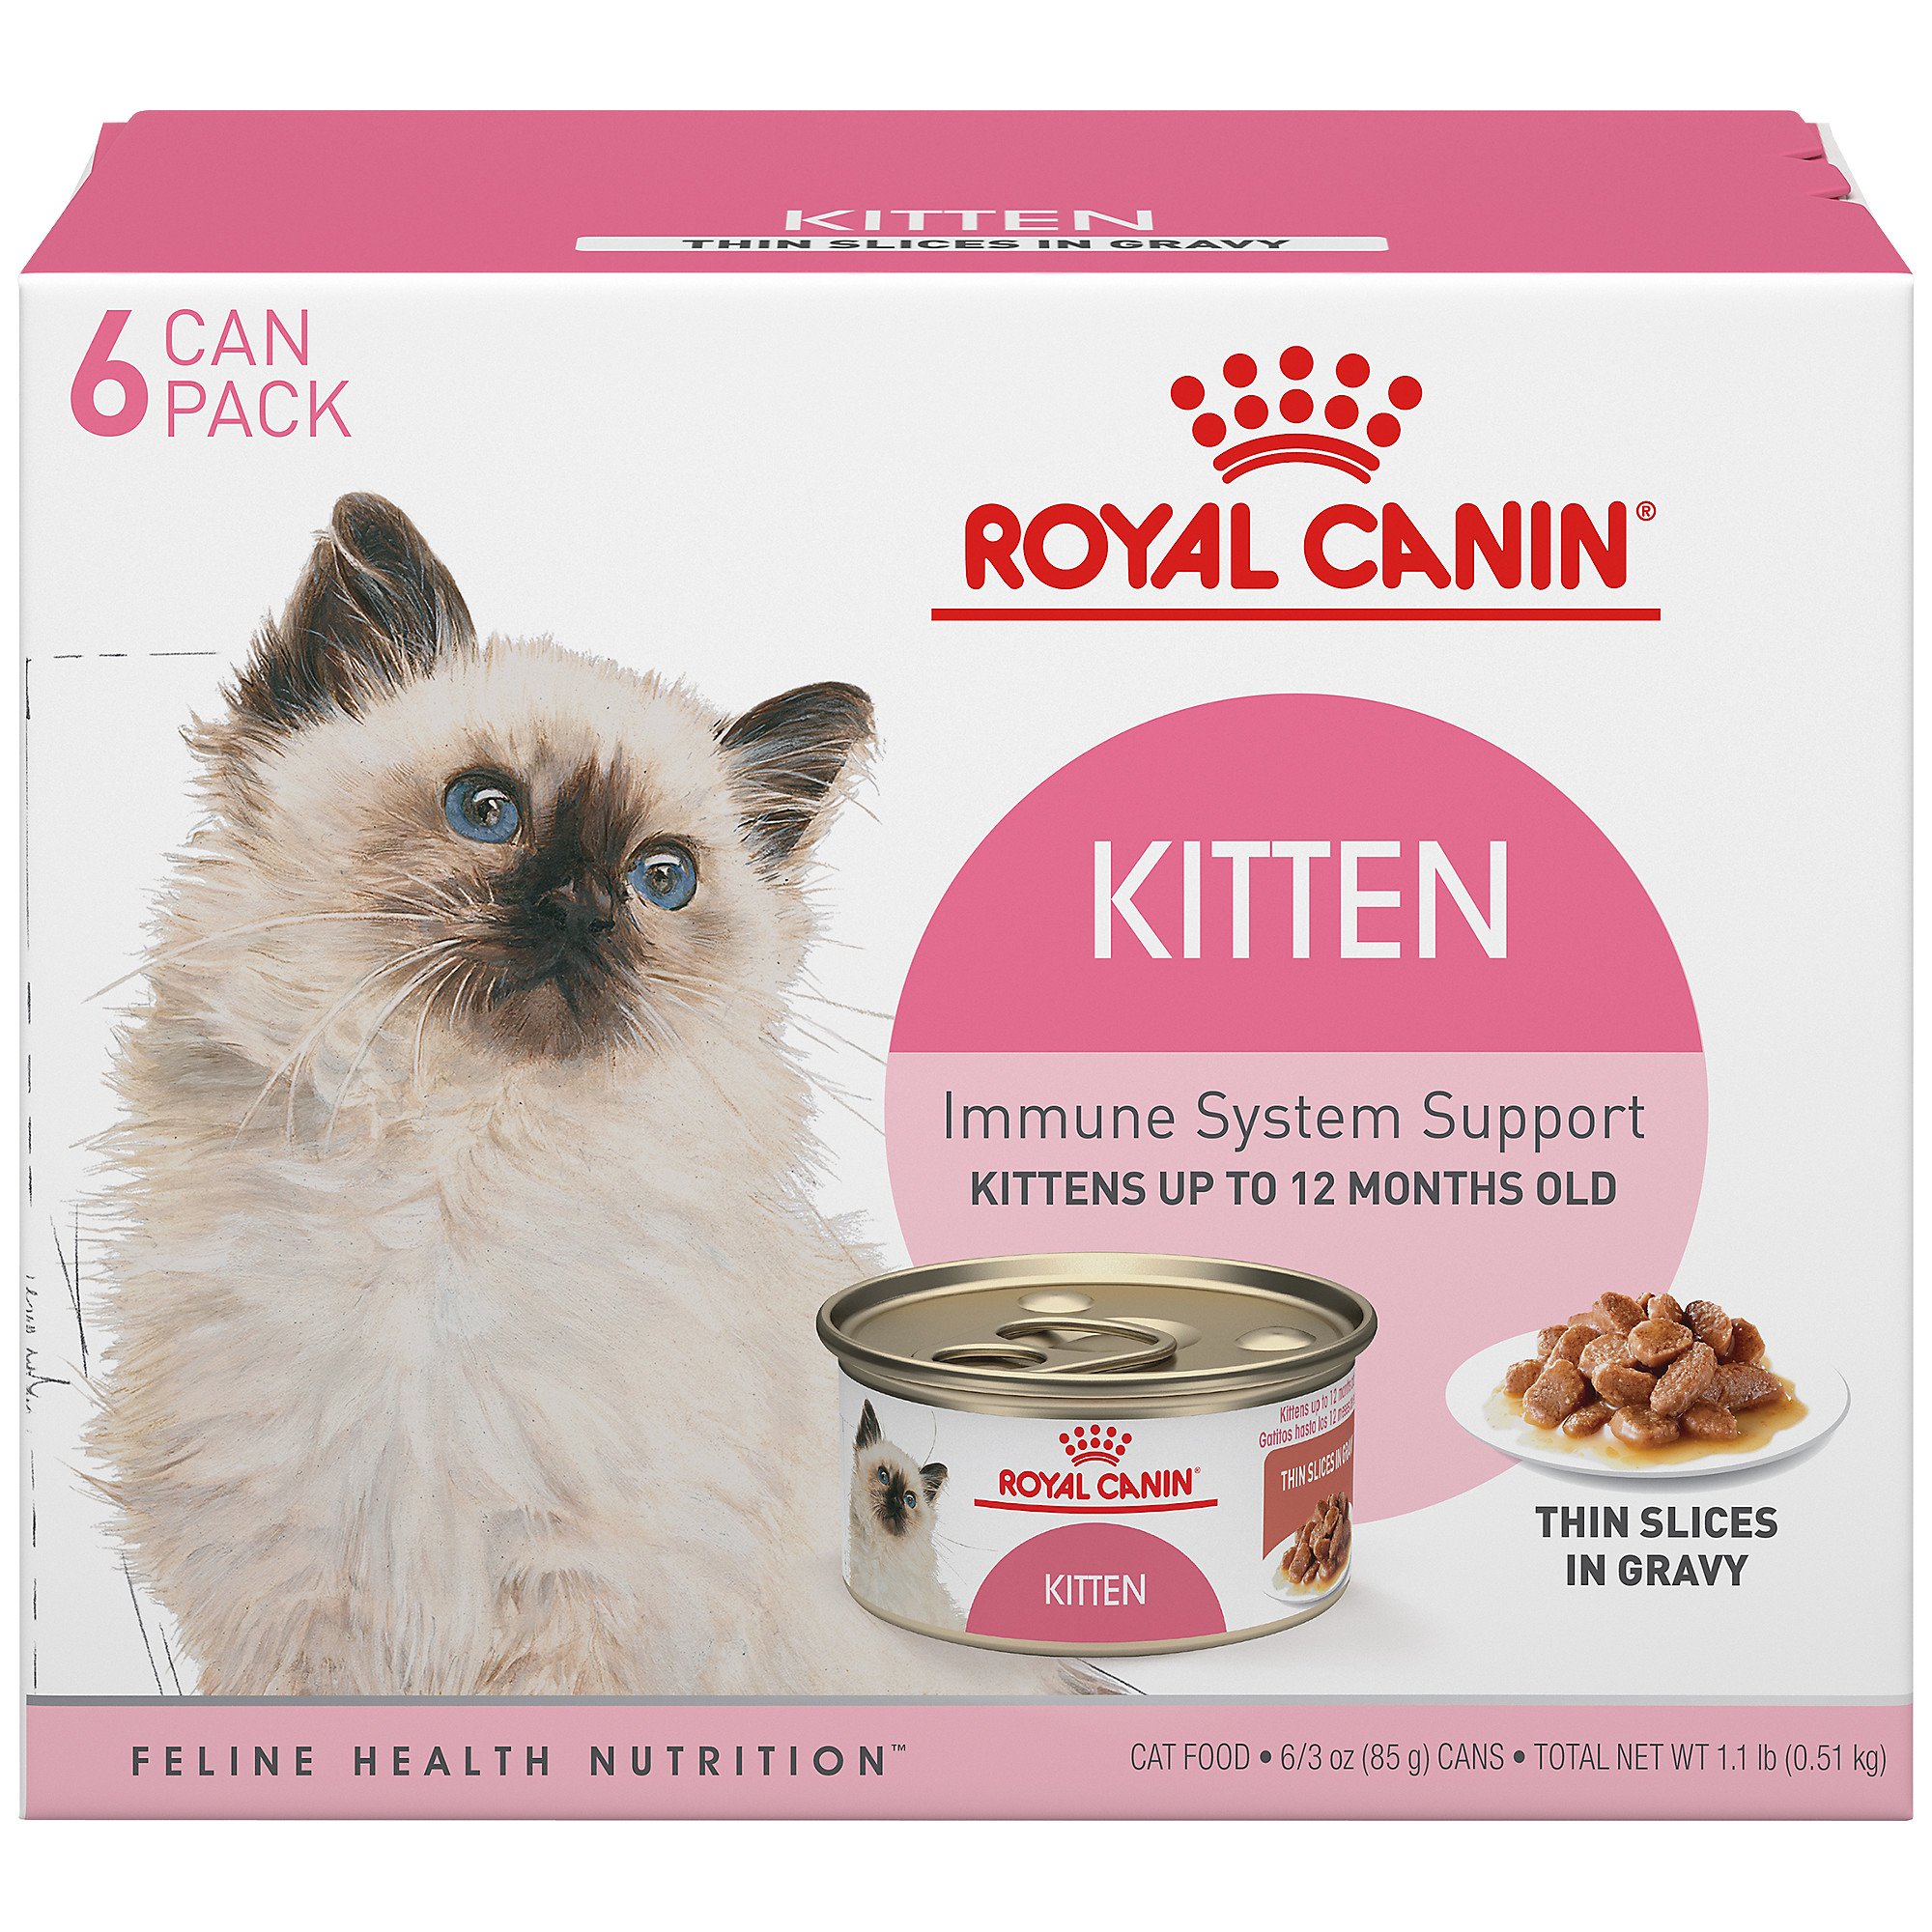 Royal Canin Kitten Wet Food Review